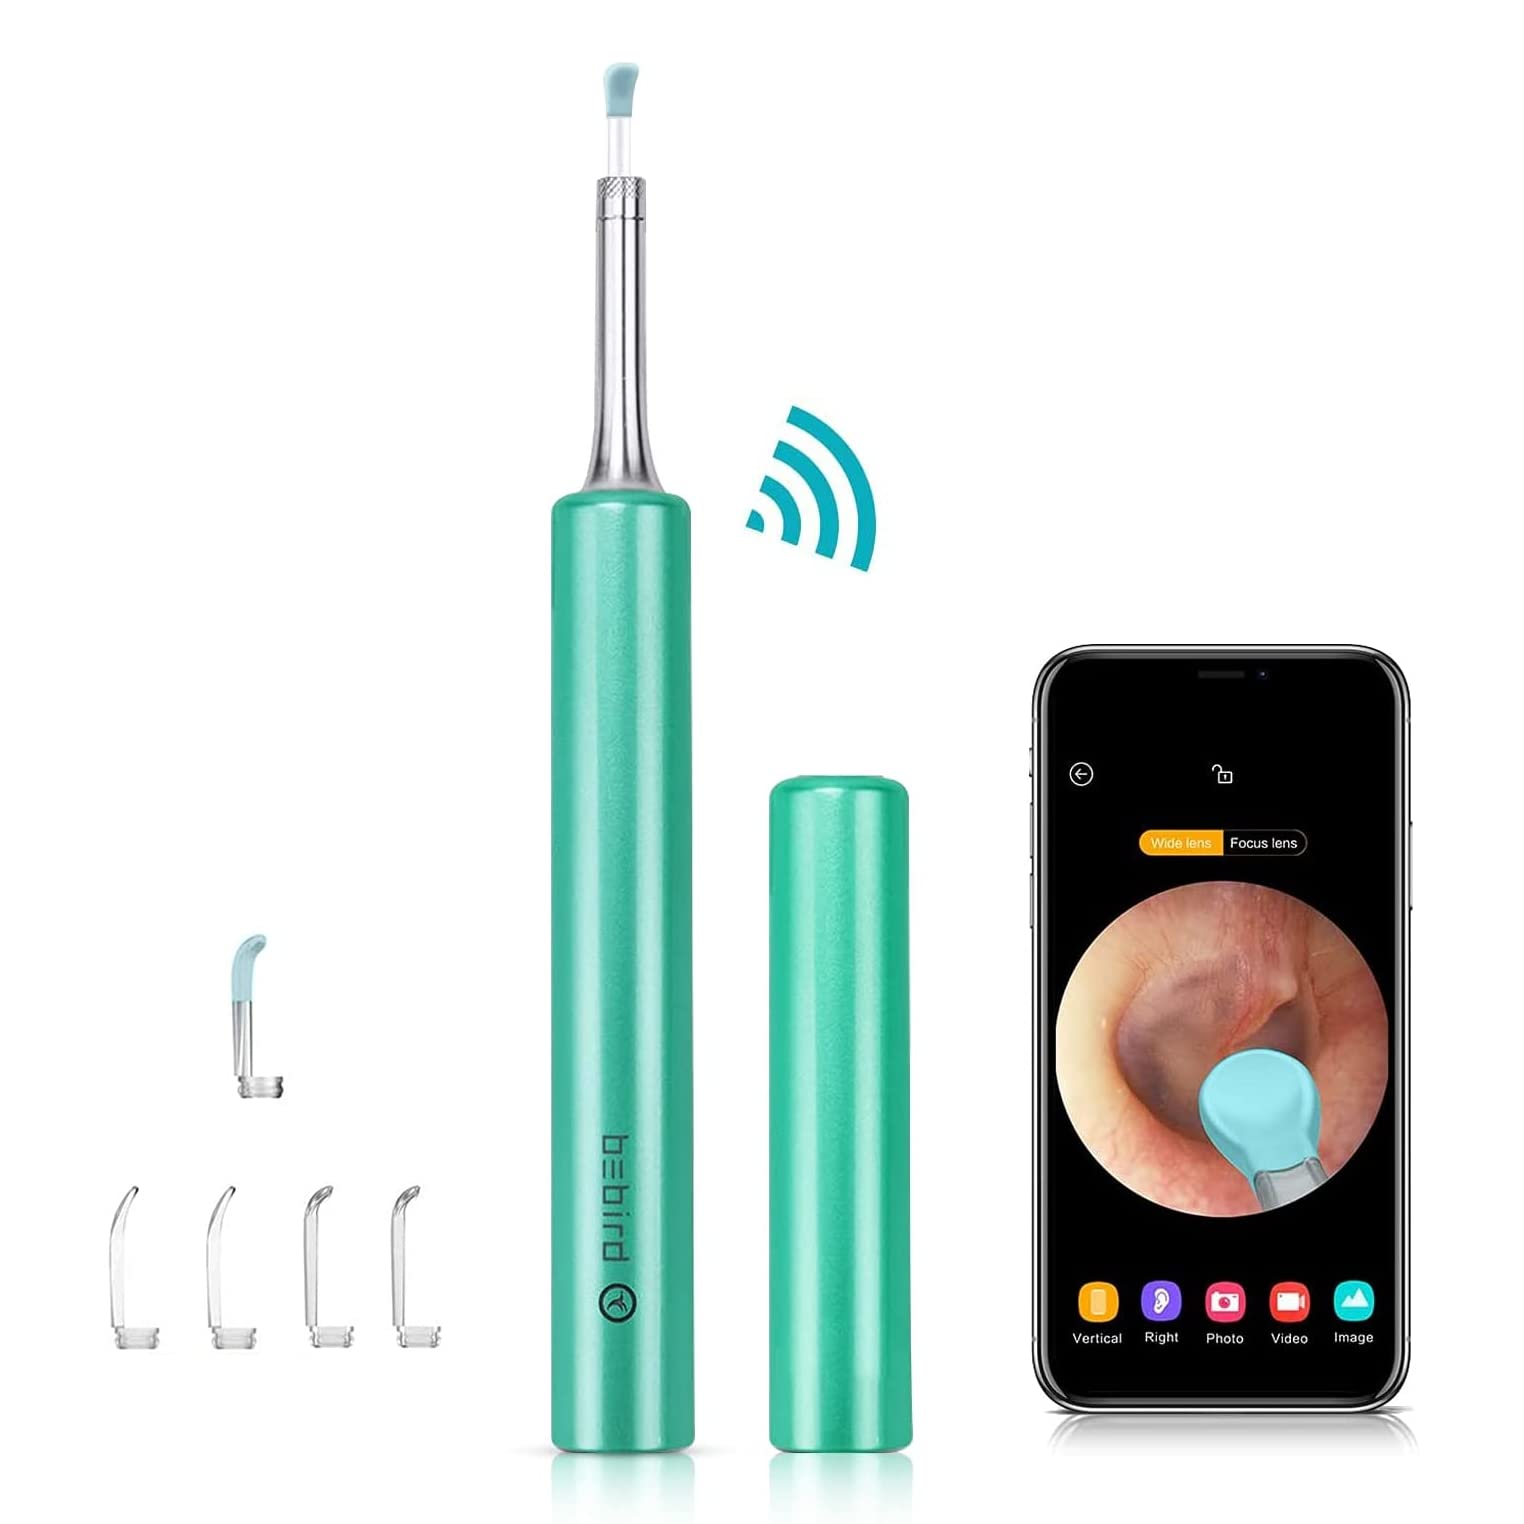 BEBIRD C3 Ear Wax Removal Tool with Ear Camera, Ear Cleaner with 1080P HD Otoscope, 6 LED Light and 4pcs Ear Scoops Replacement Cleaning Kit, Earwax Camera for iOS and Android, Green